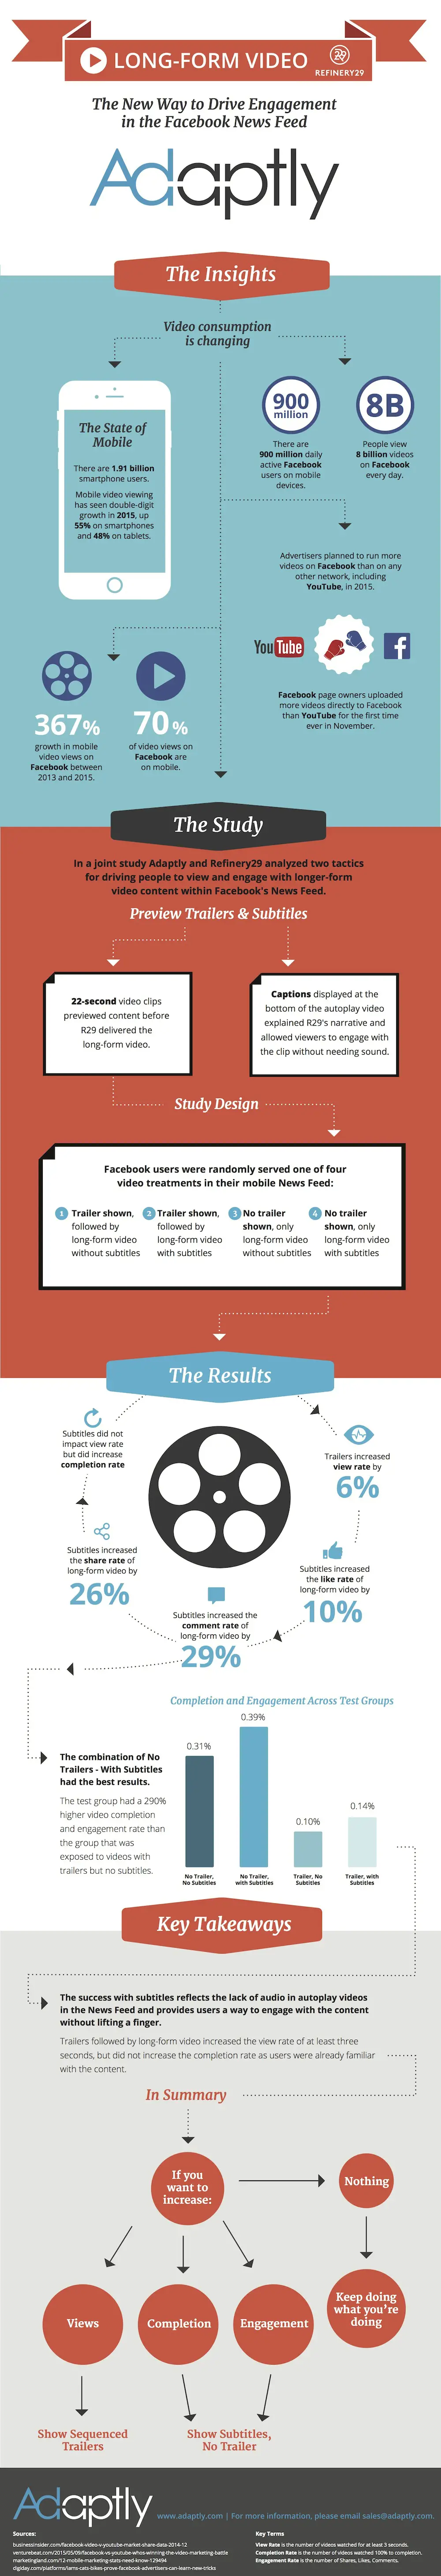 wersm-driving-engagement-with-long-form-video-on-facebook-infographic